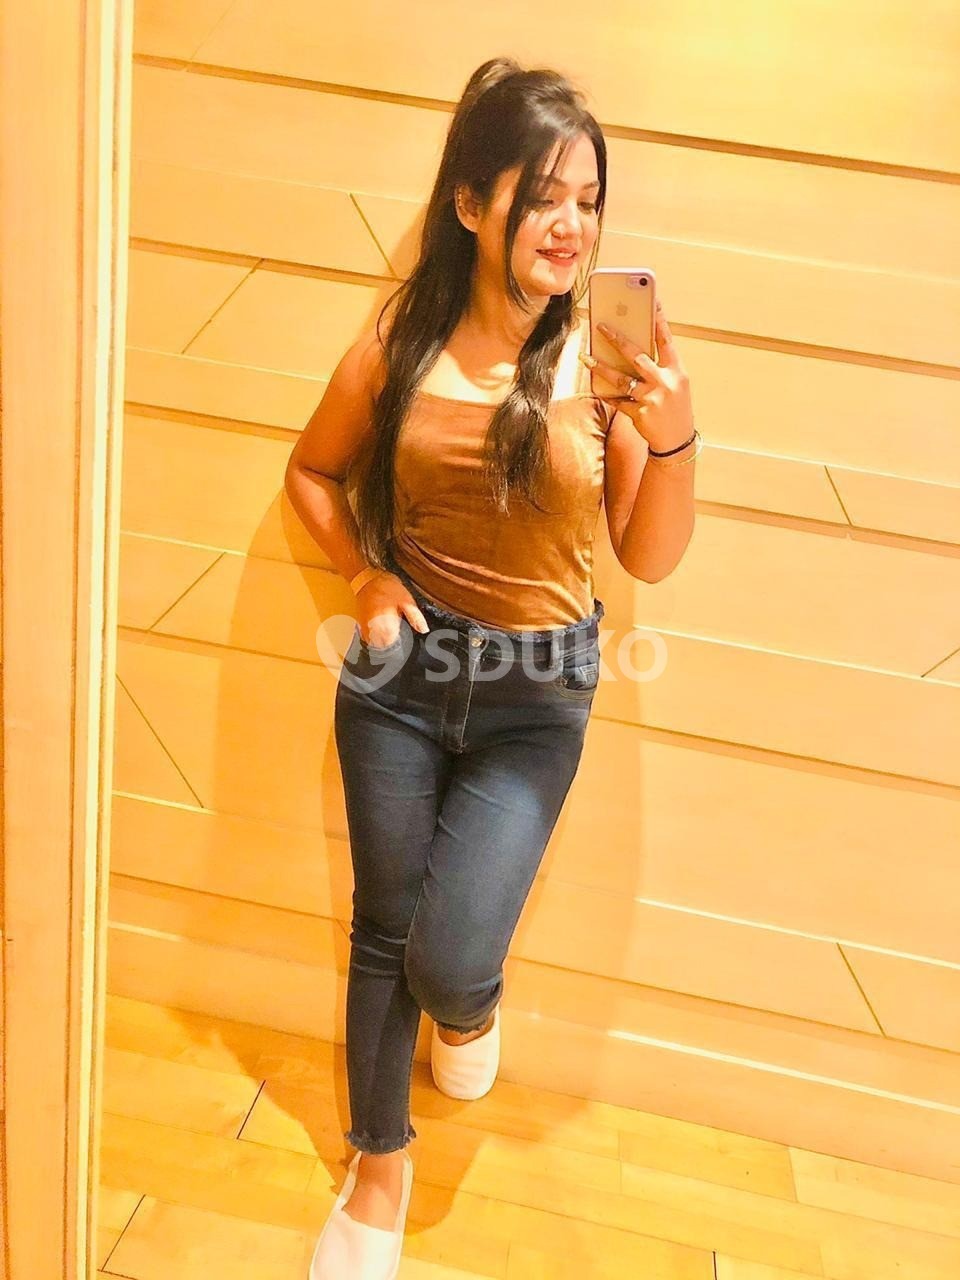 24X7 SERVICE AVAILABLE IN JAYANAGAR ✅100% SAFE AND SECURE TODAY LOW PRICE UNLIMITED ENJOY HOT COLLEGE GIRL HOUSEWIFE A